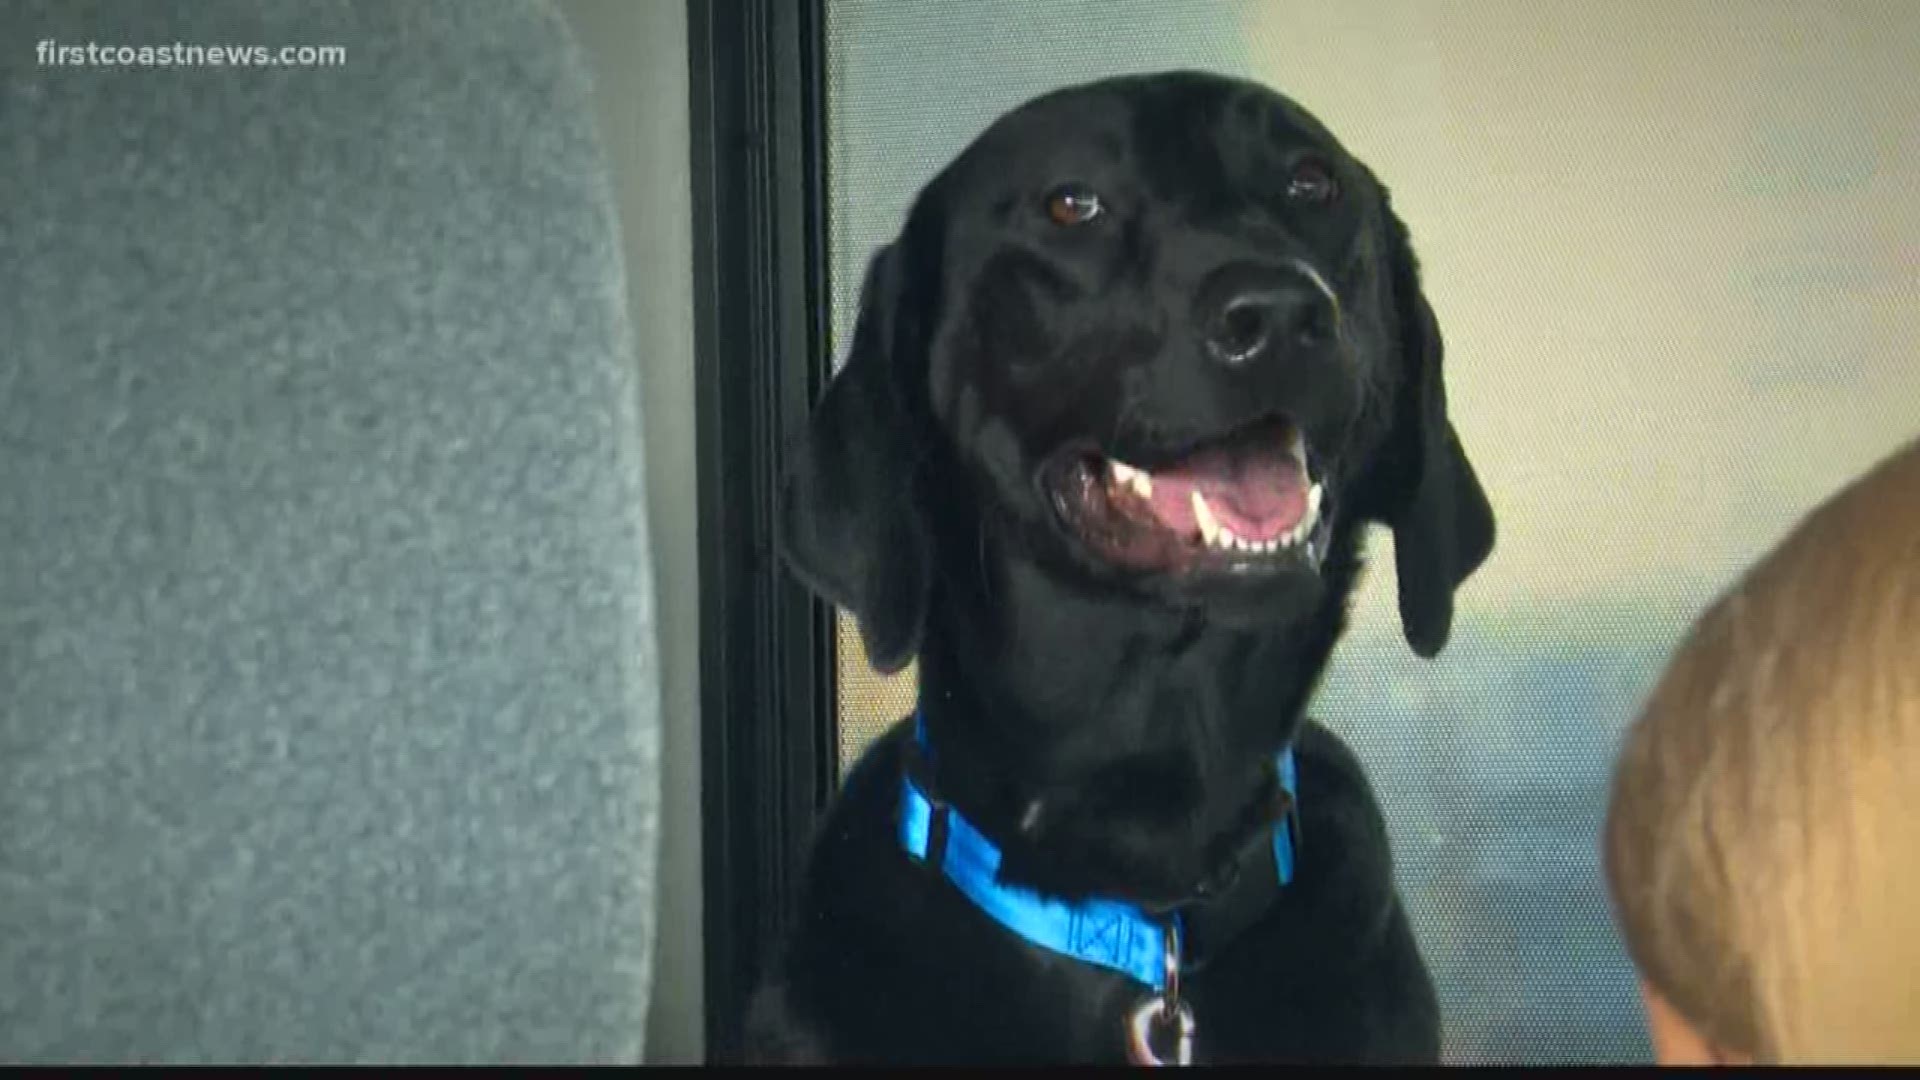 Thanks to a generous billionaire's donation of his private jet, the dogs were able to fly in style to Florida. The two dogs will be a part of Texas' first recruits for K9s For Warriors' elite service training dog program.